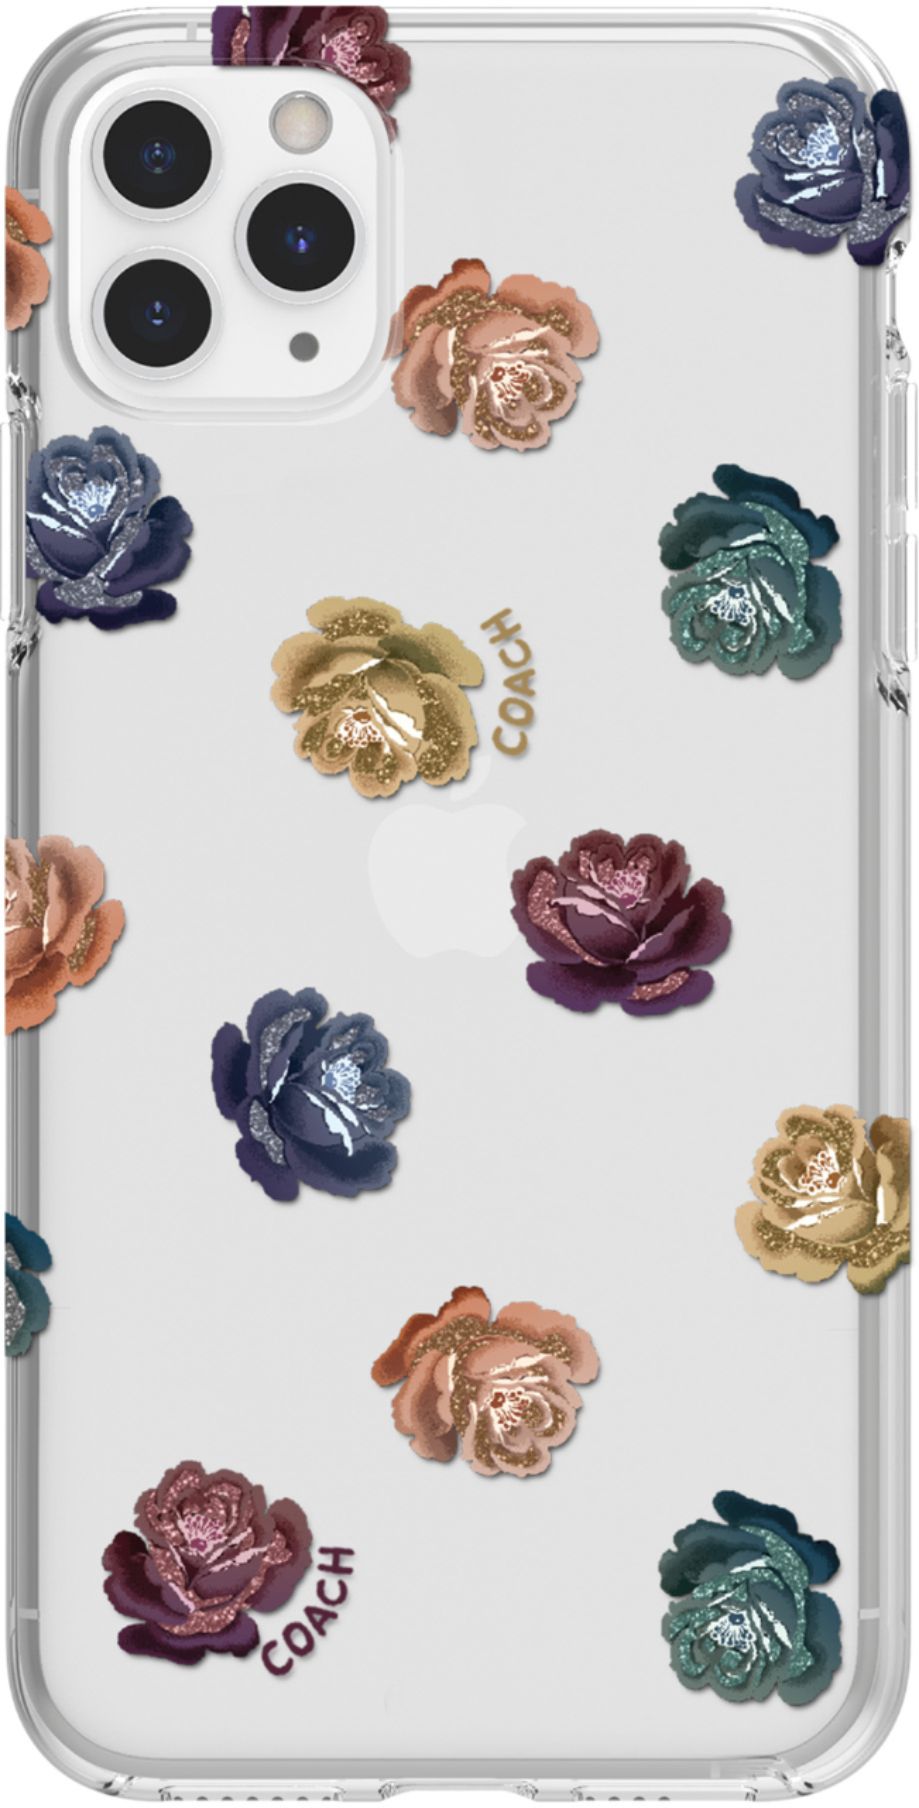 Coach - Dreamy Peony Protective Case for Apple iPhone 11 Pro Max - Clear/Rain... 191058103628 | eBay